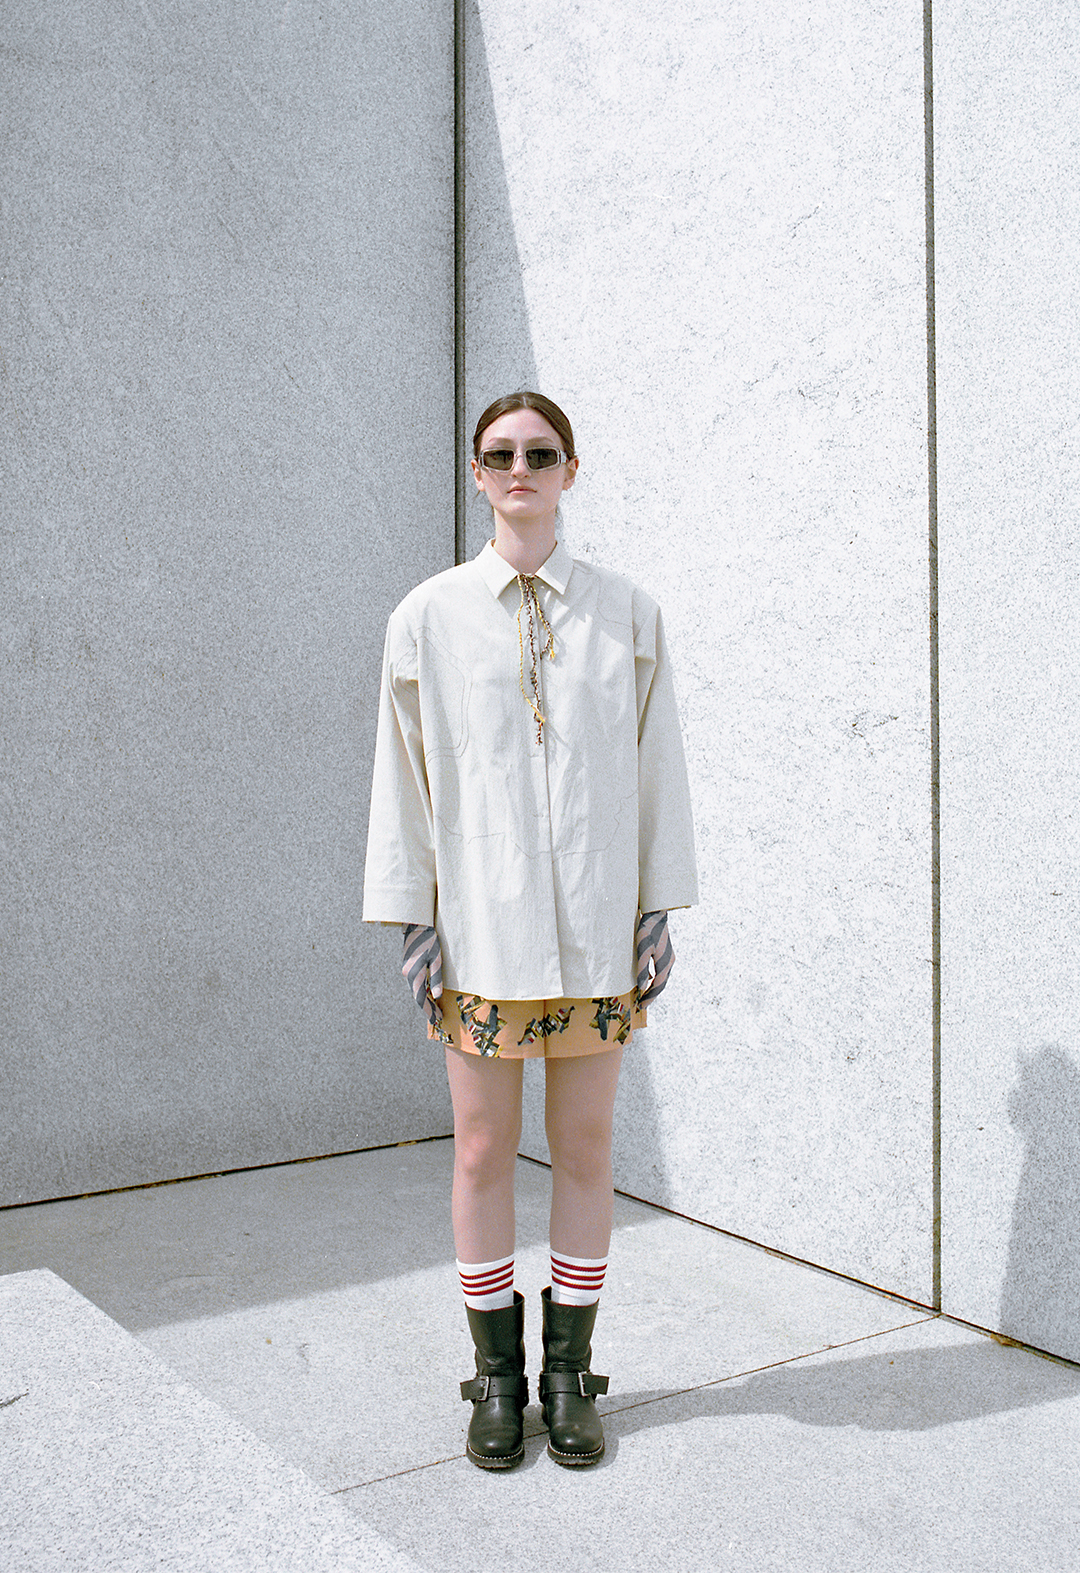 This is a green, embroidered, oversized shirt, worn with patchwork digital printed shorts. It is accessorized with sunglasses, red-striped socks, and black boots. The model is posed in front of a gray wall.